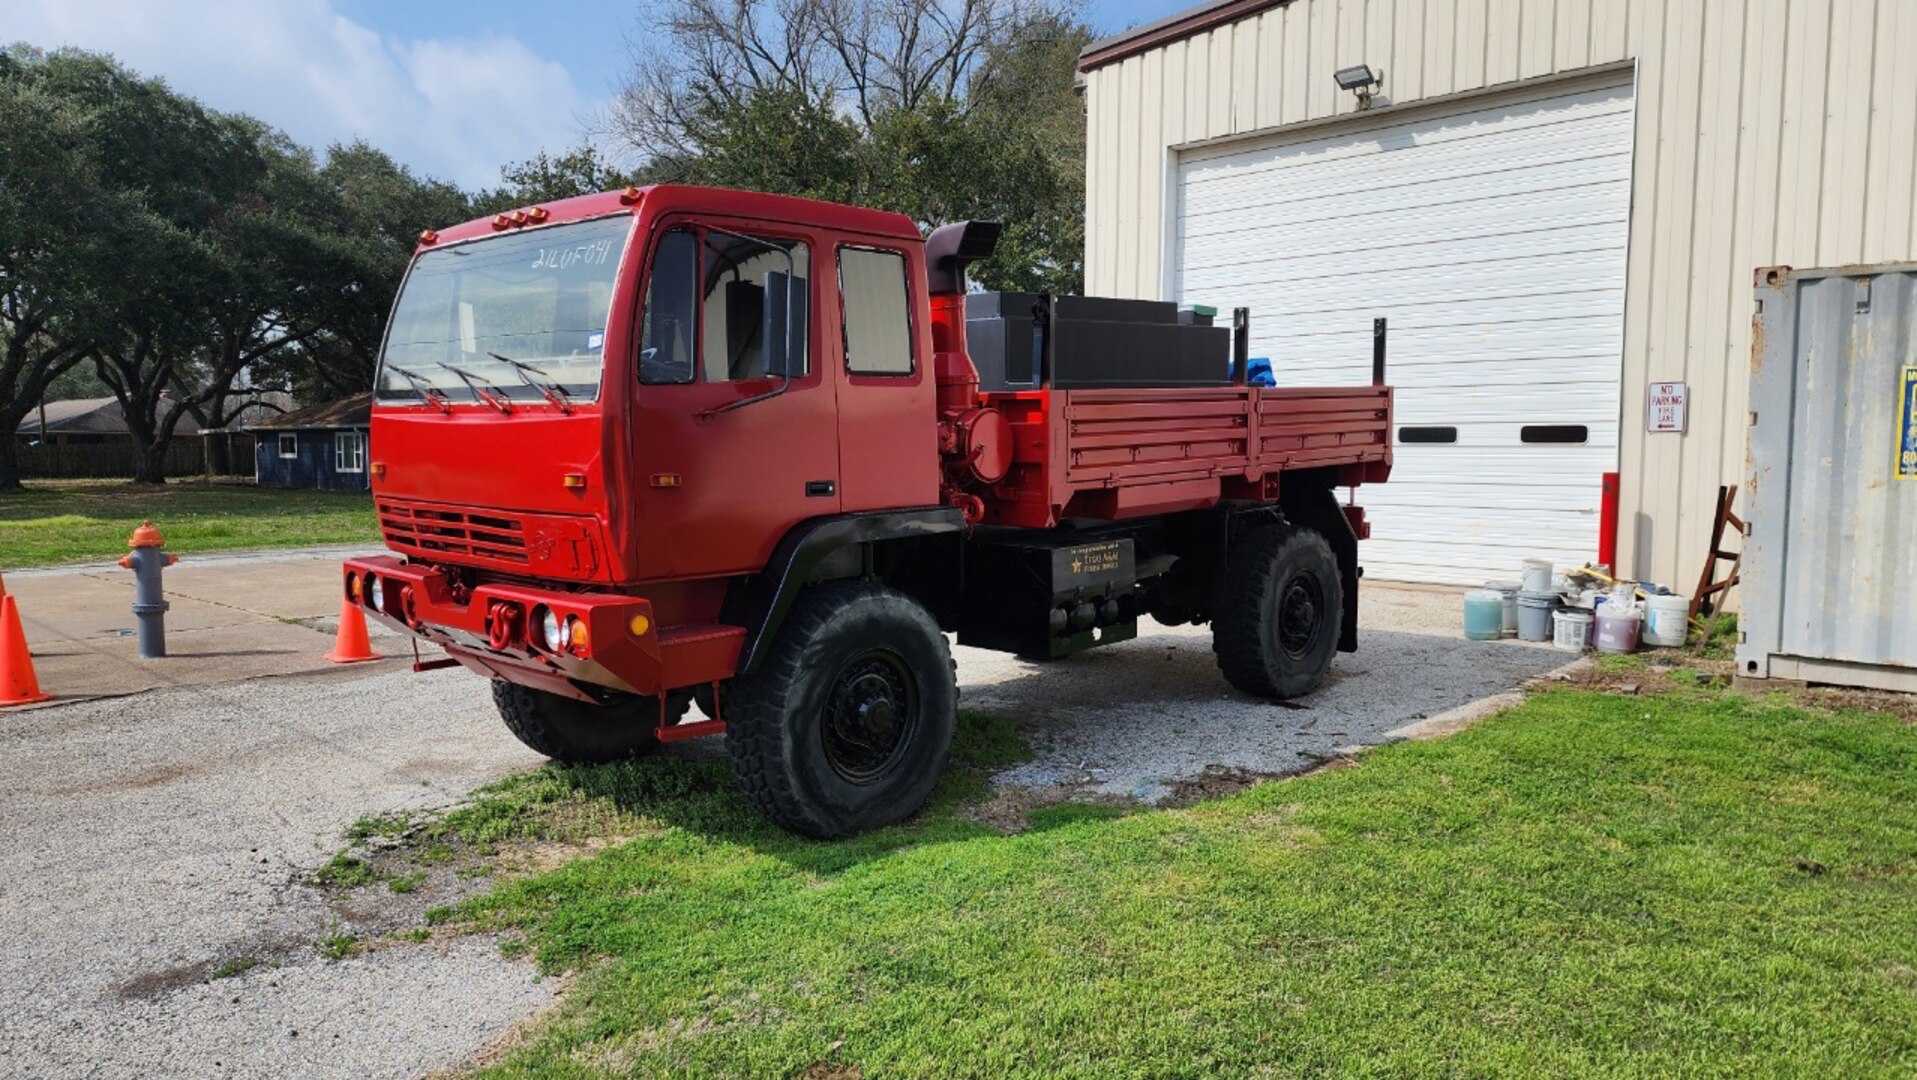 A former military cargo truck painted red sits outside a tan building. The truck has no military markings but does have a water tank on its bed used to take water to fires.